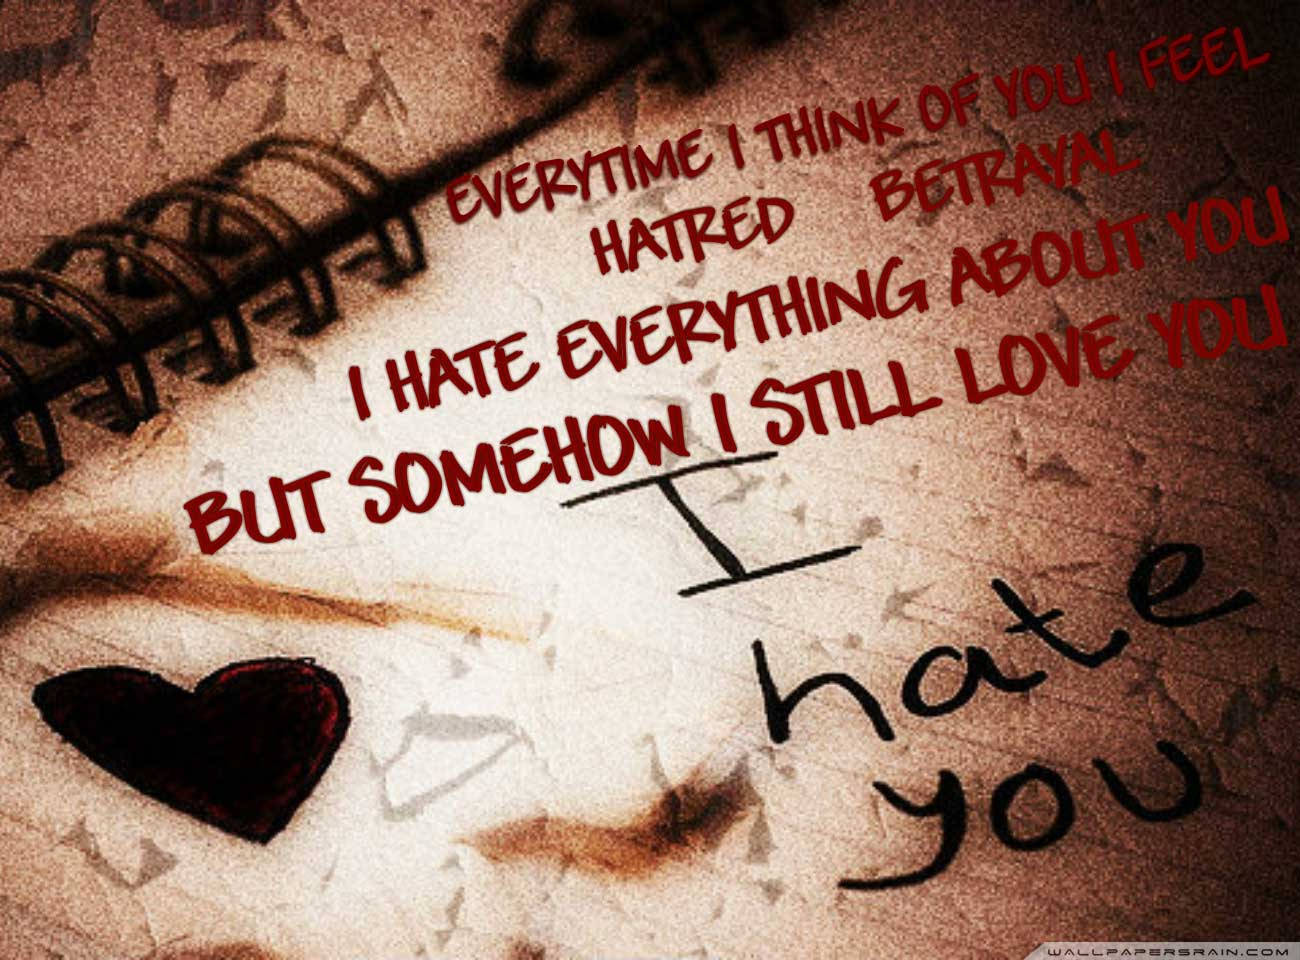 A Tale Of Opposite Emotions - Love And Hate